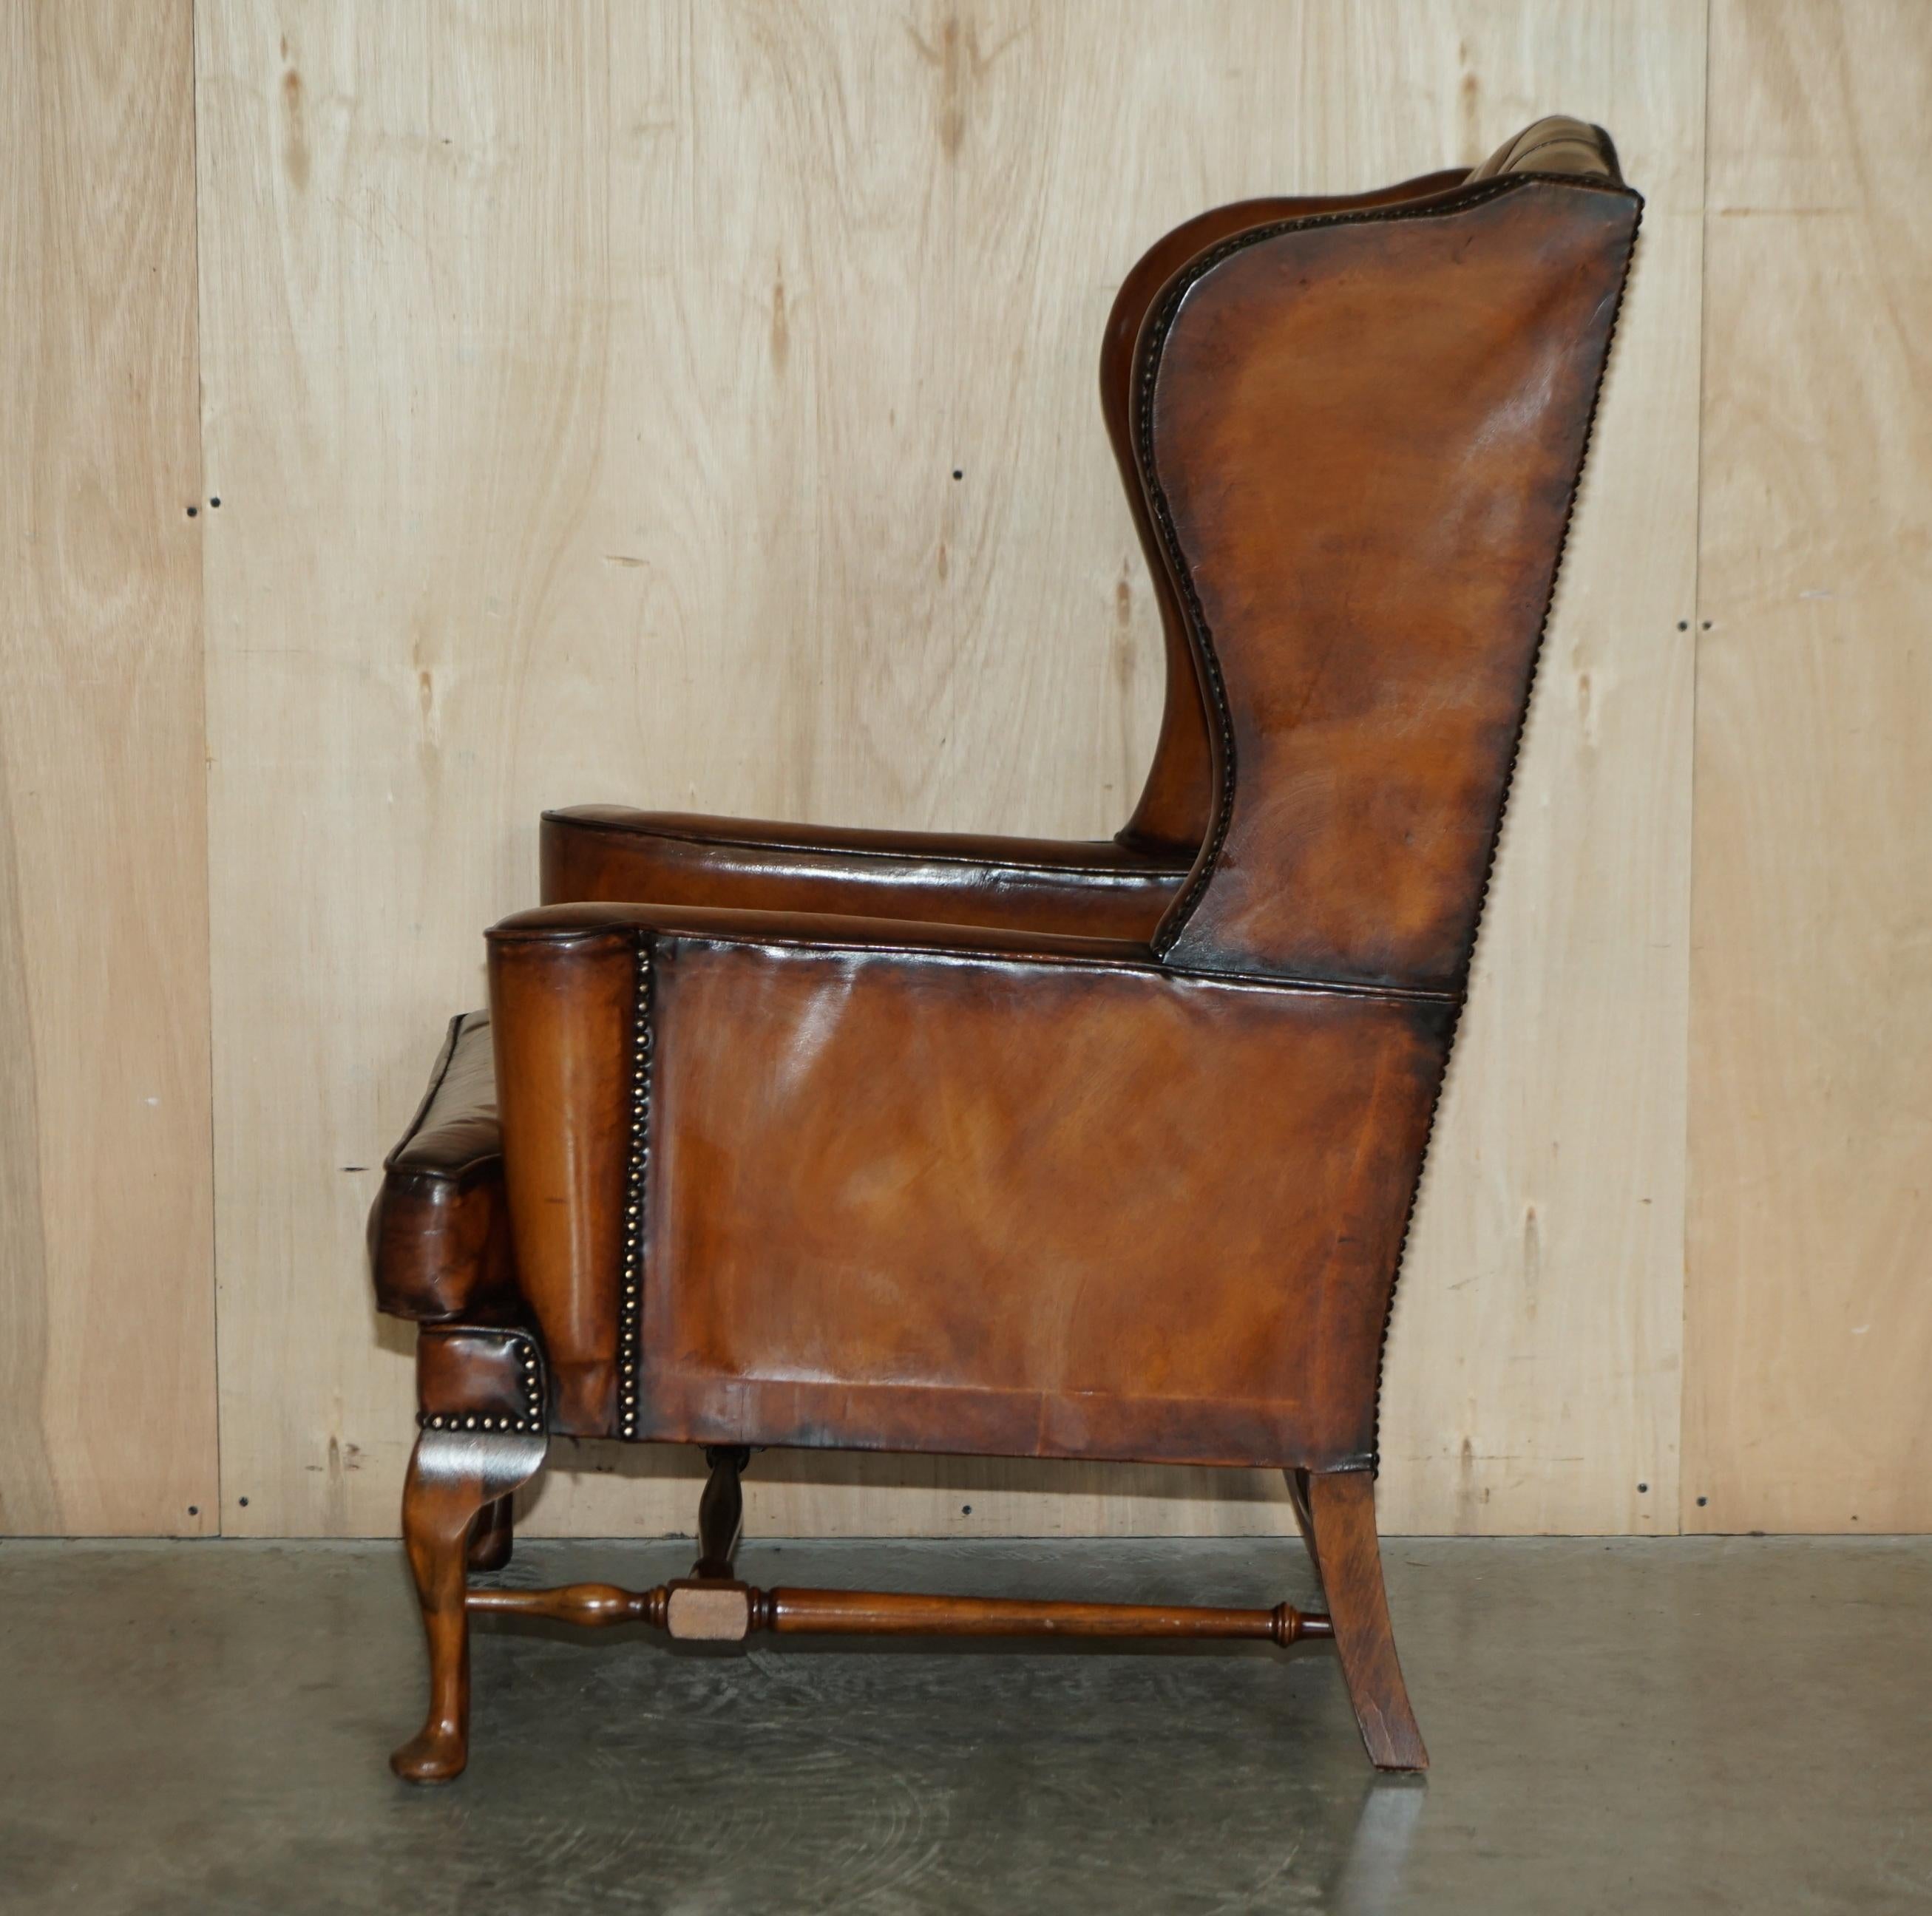 PAIR OF ANTIQUE WILLIAM MORRIS WiNGBACK ARMCHAIRS HAND DYED CIGAR BROWN LEATHER For Sale 10